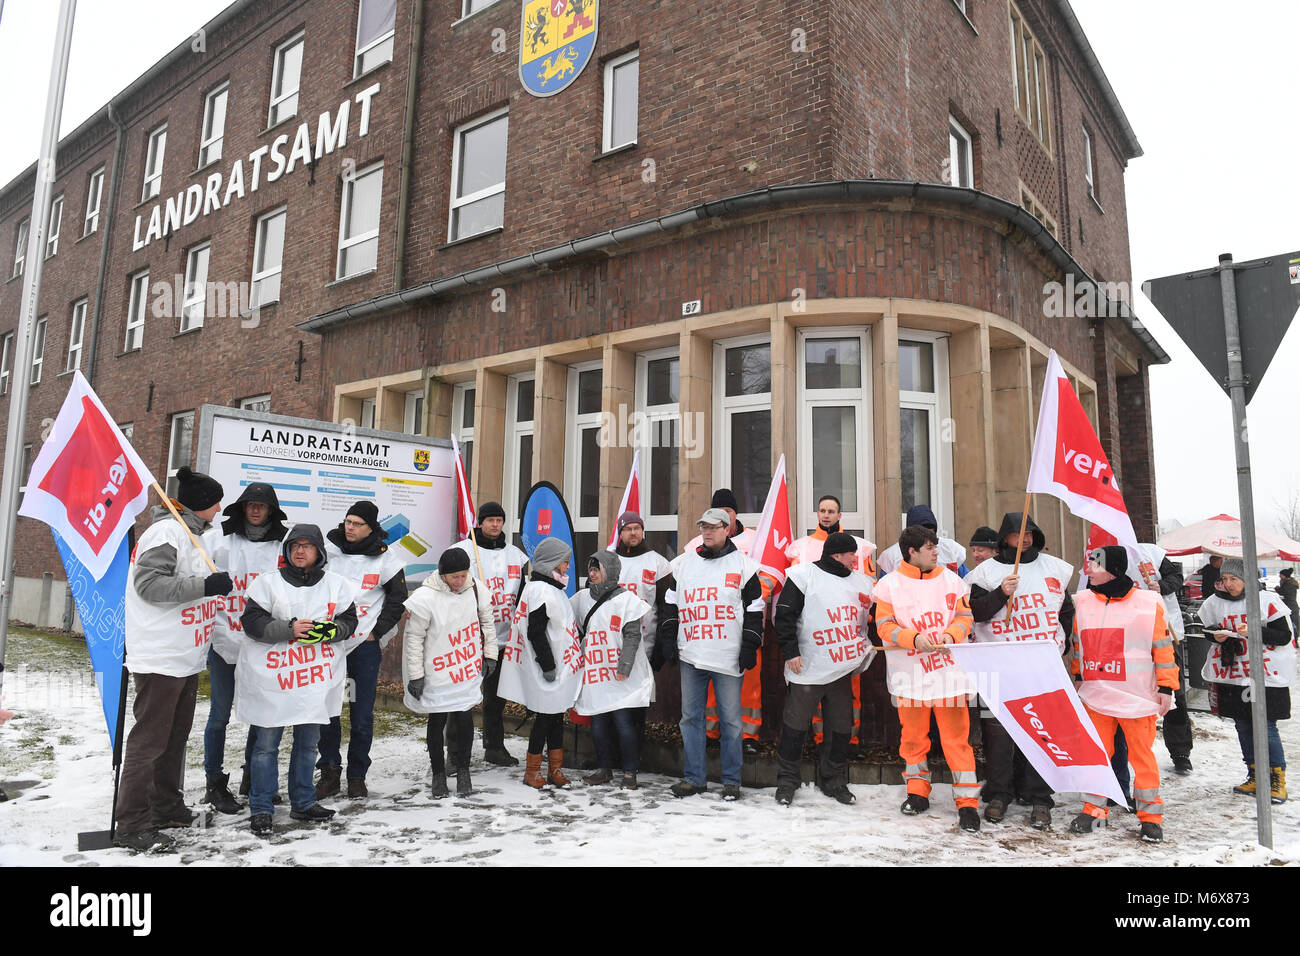 07 March 2018, Germany, Stralsund: Public service staff have gathered in front of the district office of county Western Pomerania and Ruegen for a warning strike. The first round of wage and salary negotiations for the nationwide 2, 3 million public service emplyees has ended without an offer from public service employers more than a week ago. Photo: Stefan Sauer/dpa Stock Photo